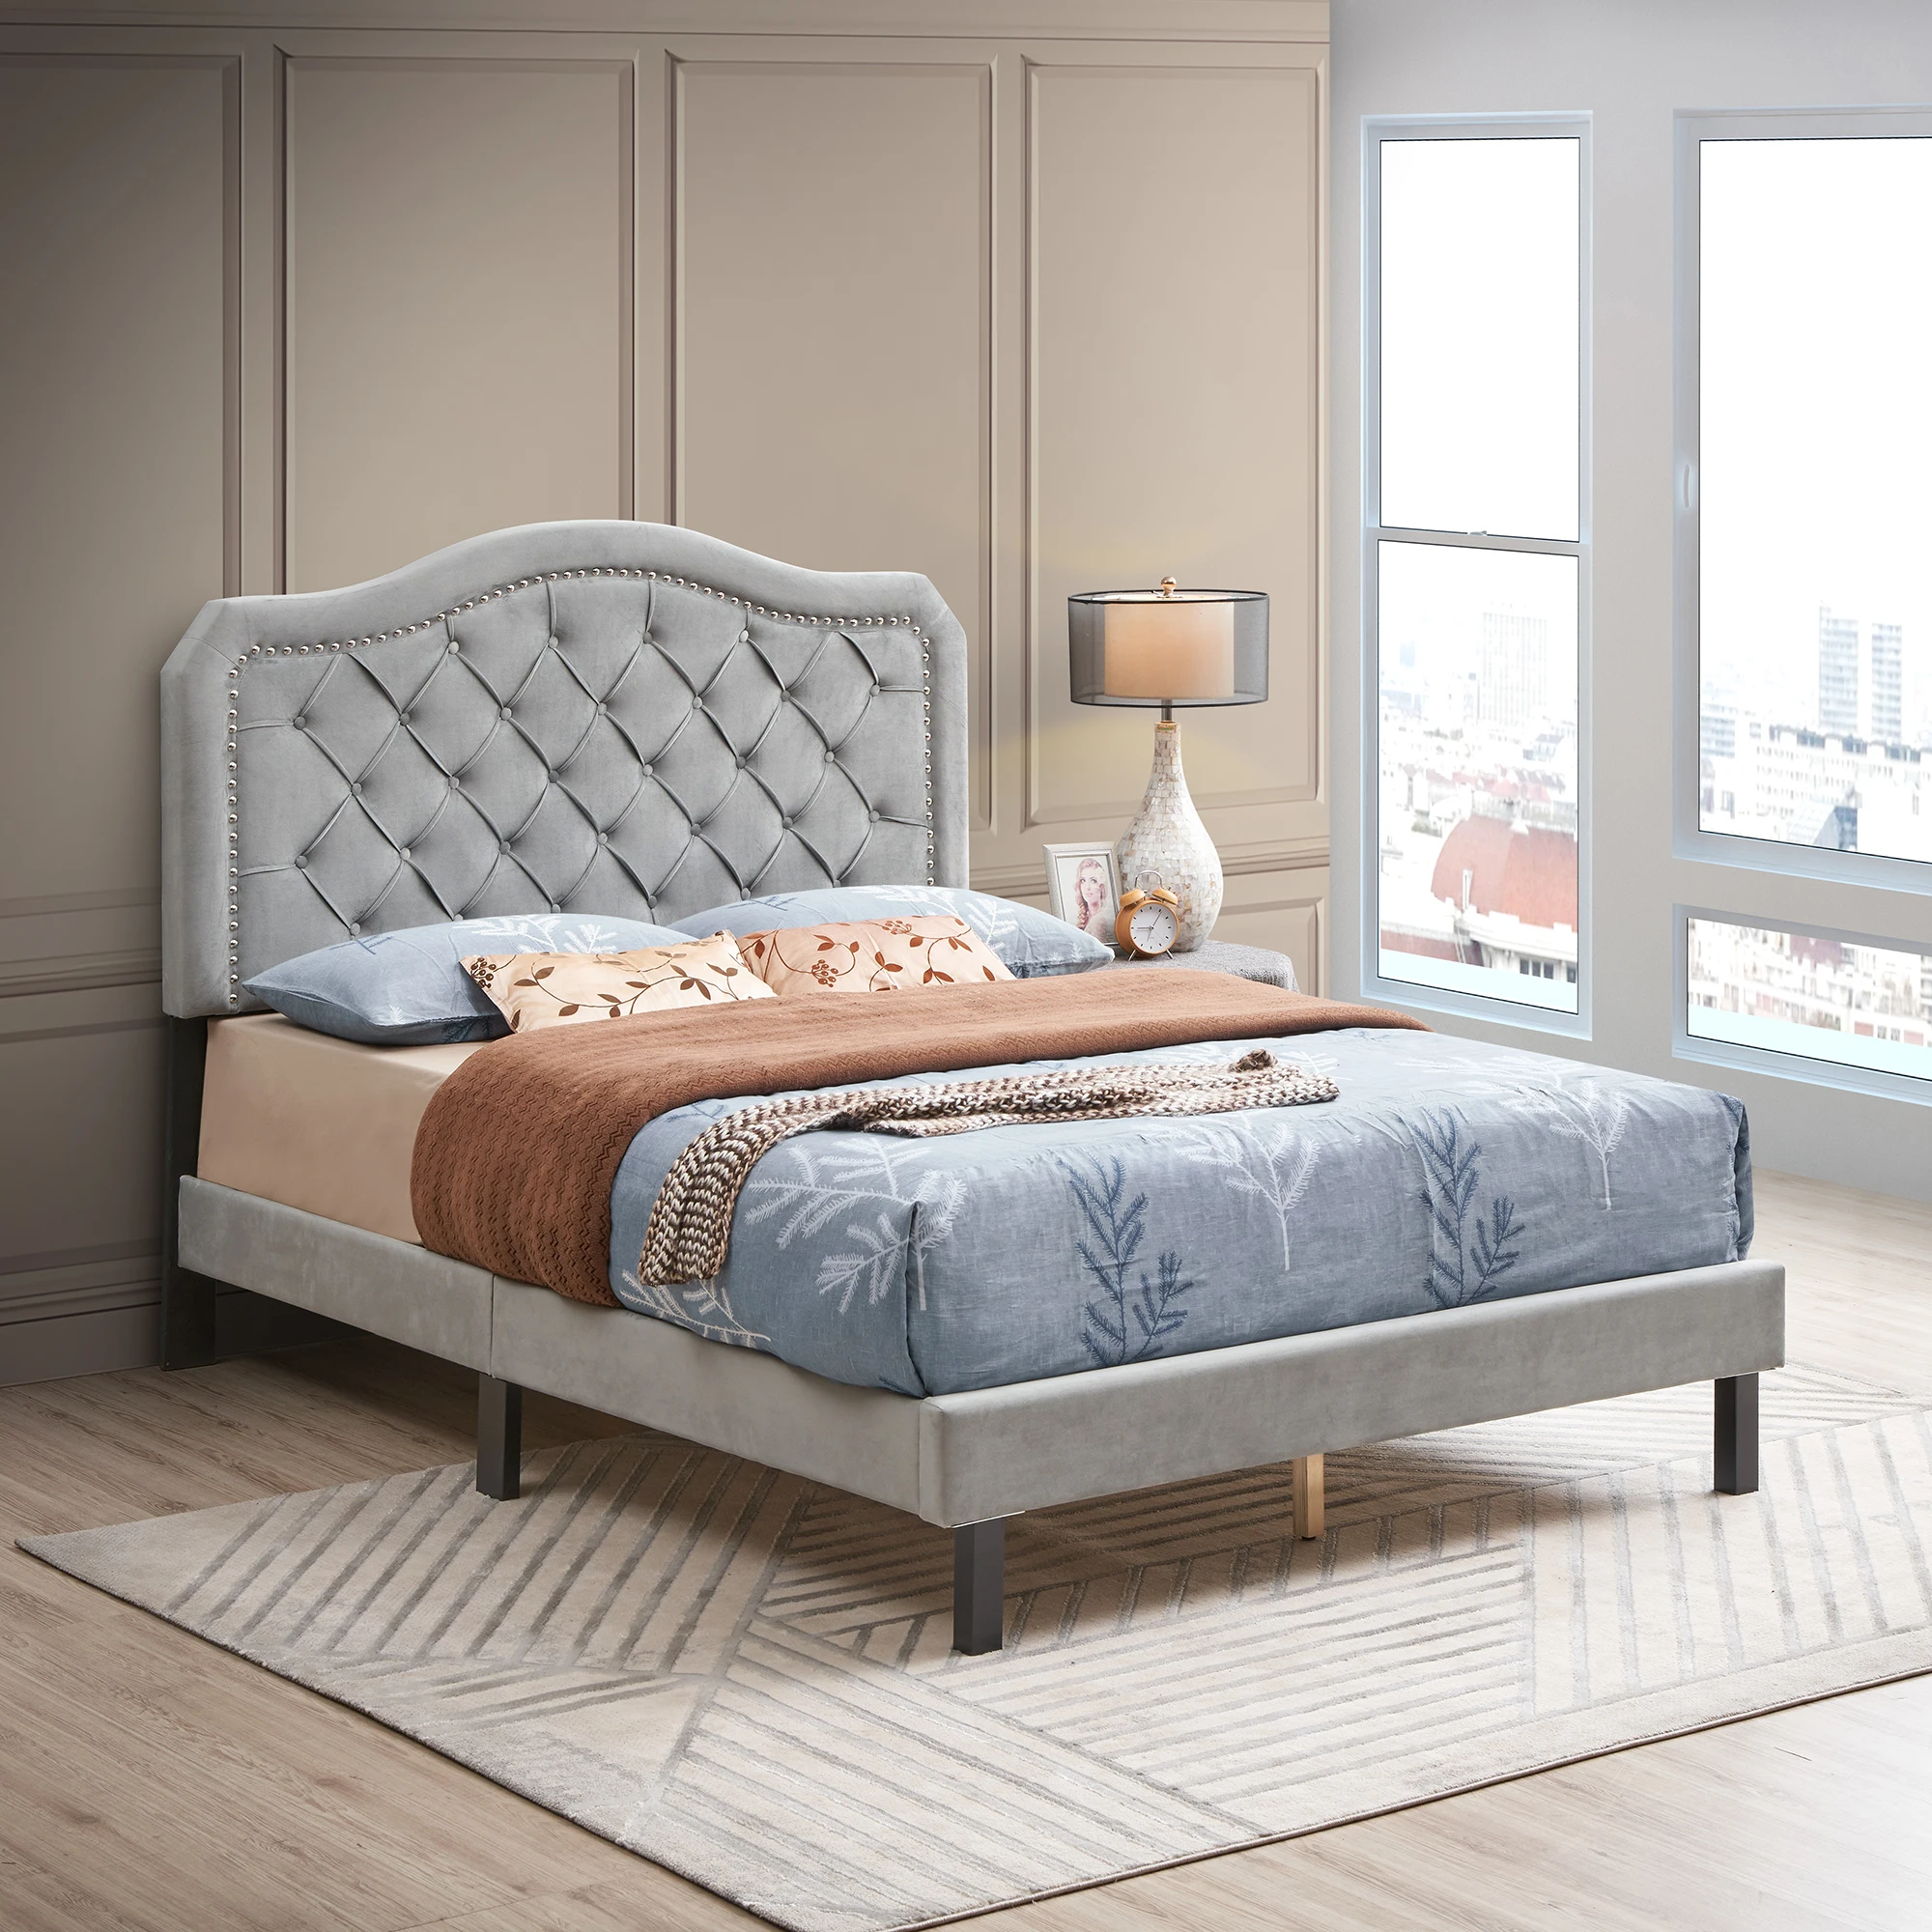 

Queen Upholstered Bed Button Tufted with Curve Design-Strong Wood Slat Support Easy Assembly Gray Velvet Platform Bed[US-W]